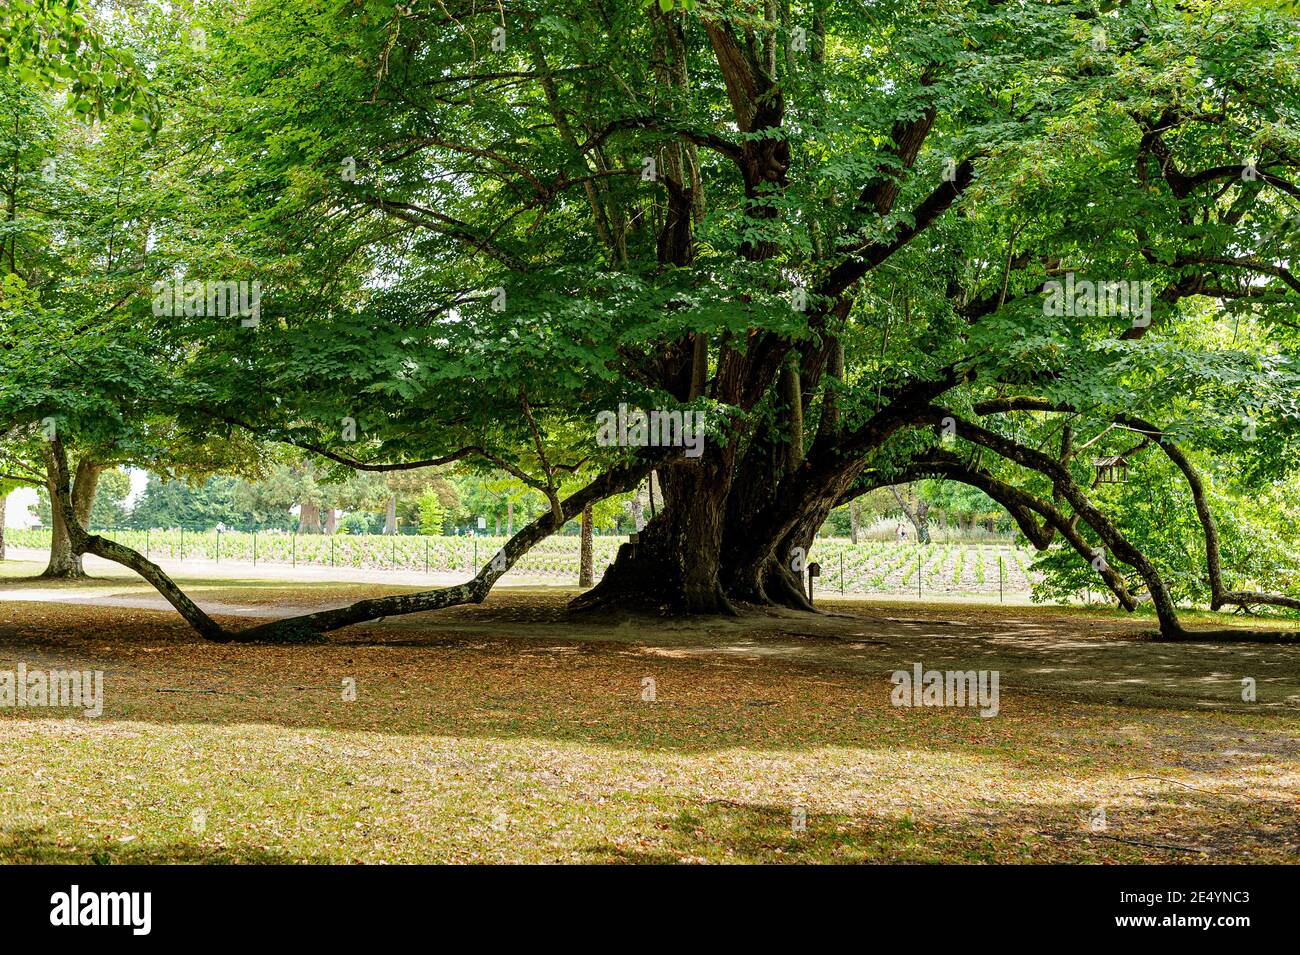 A gigantic large-leafed lime tree, curiosity to be seen in the park of the castle of Cheverny. France. Stock Photo